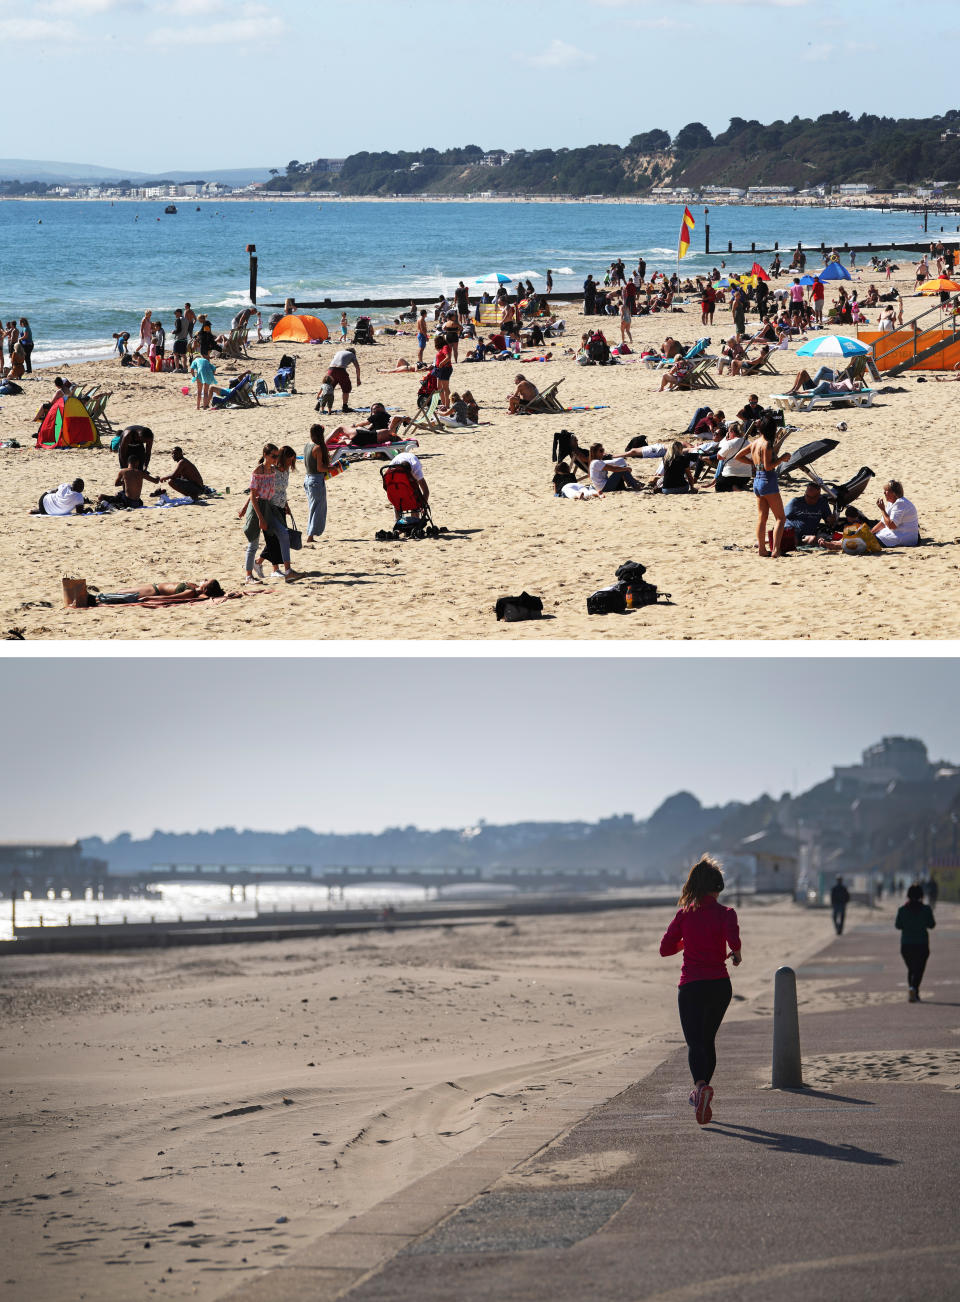 Composite photos of Bournemouth beach on 14/09/19 (top), and on Monday 23/03/20 (bottom), the day Prime Minister Boris Johnson put the UK in lockdown to help curb the spread of the coronavirus.